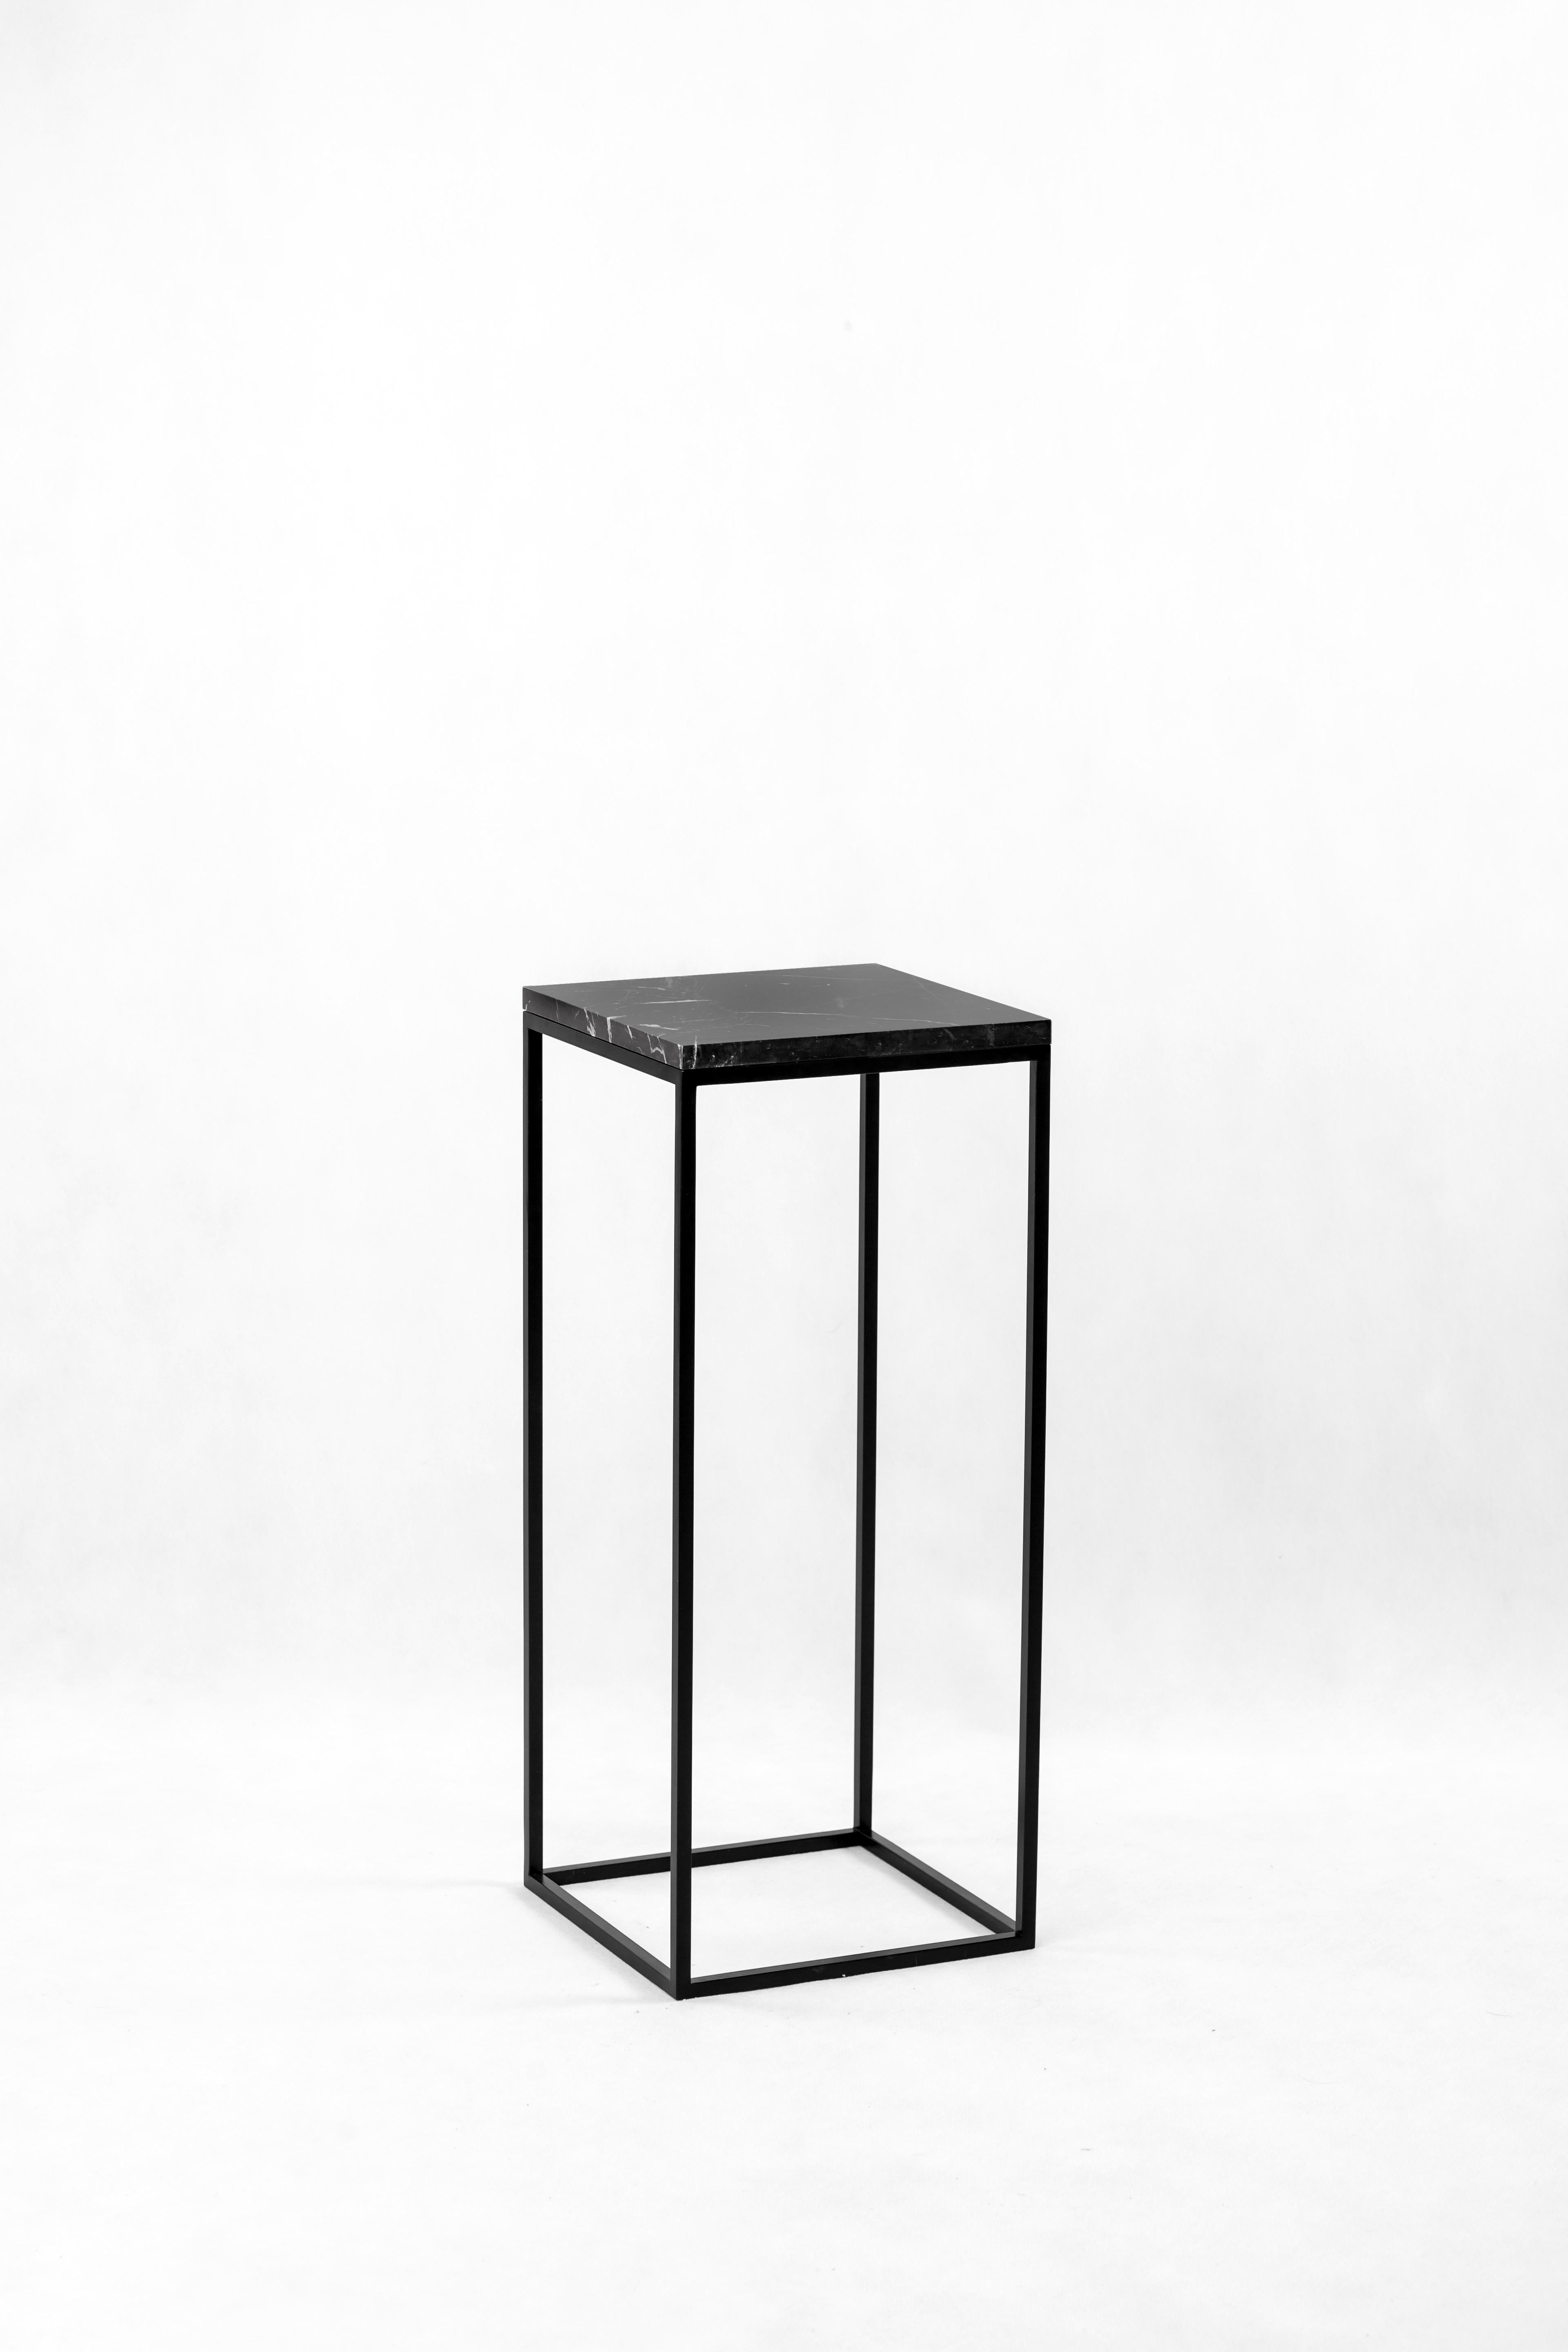 Set of 2 medium Pillar side tables by Un’common
Dimensions: W 30 x D 30 x H 72 cm
Materials: White Carrara marble, Nero Marquina marble, steel.
Available in 3 sizes: H 42, H 72, H 90 cm.

PILLAR is a piece of accessory furniture. Do you want to